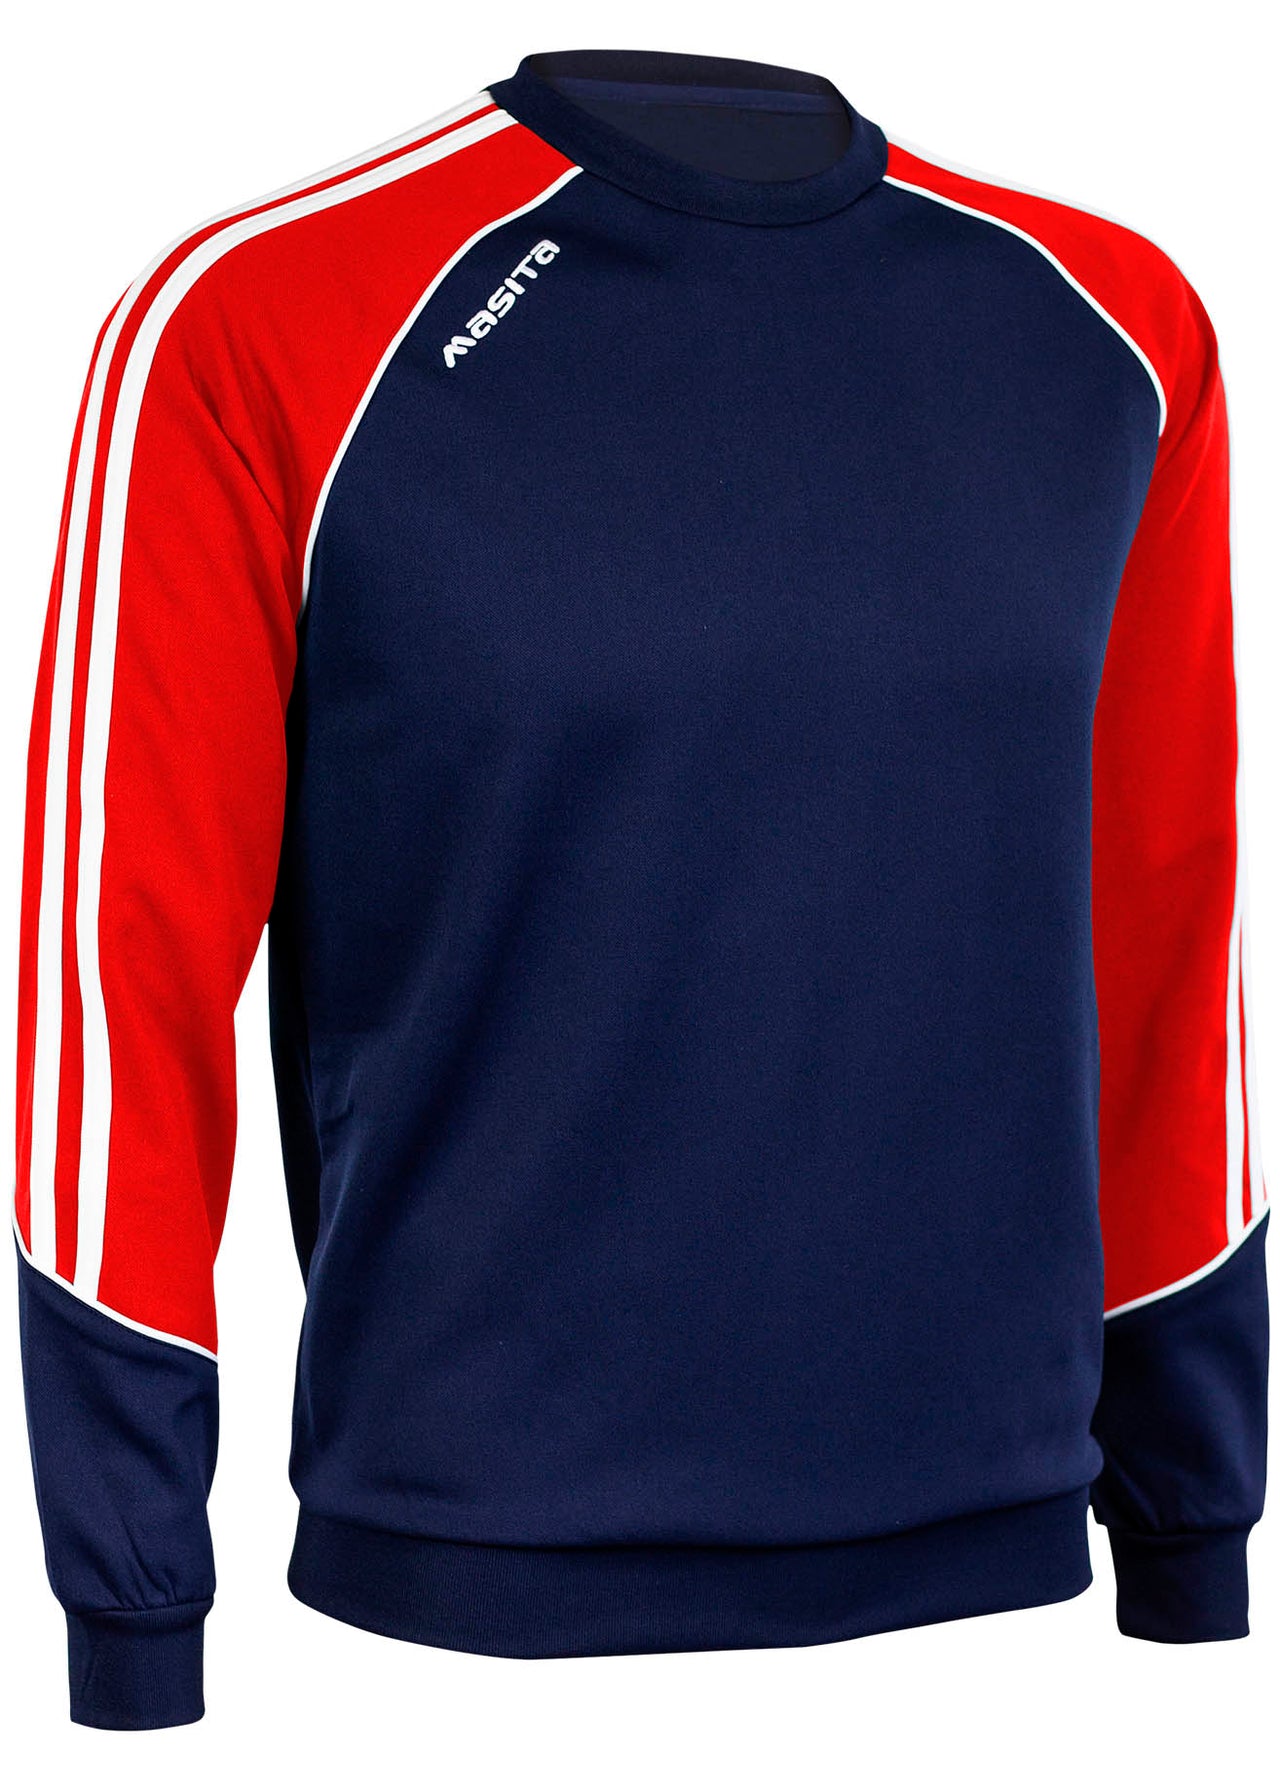 Oslo Sweater Navy/Red/White